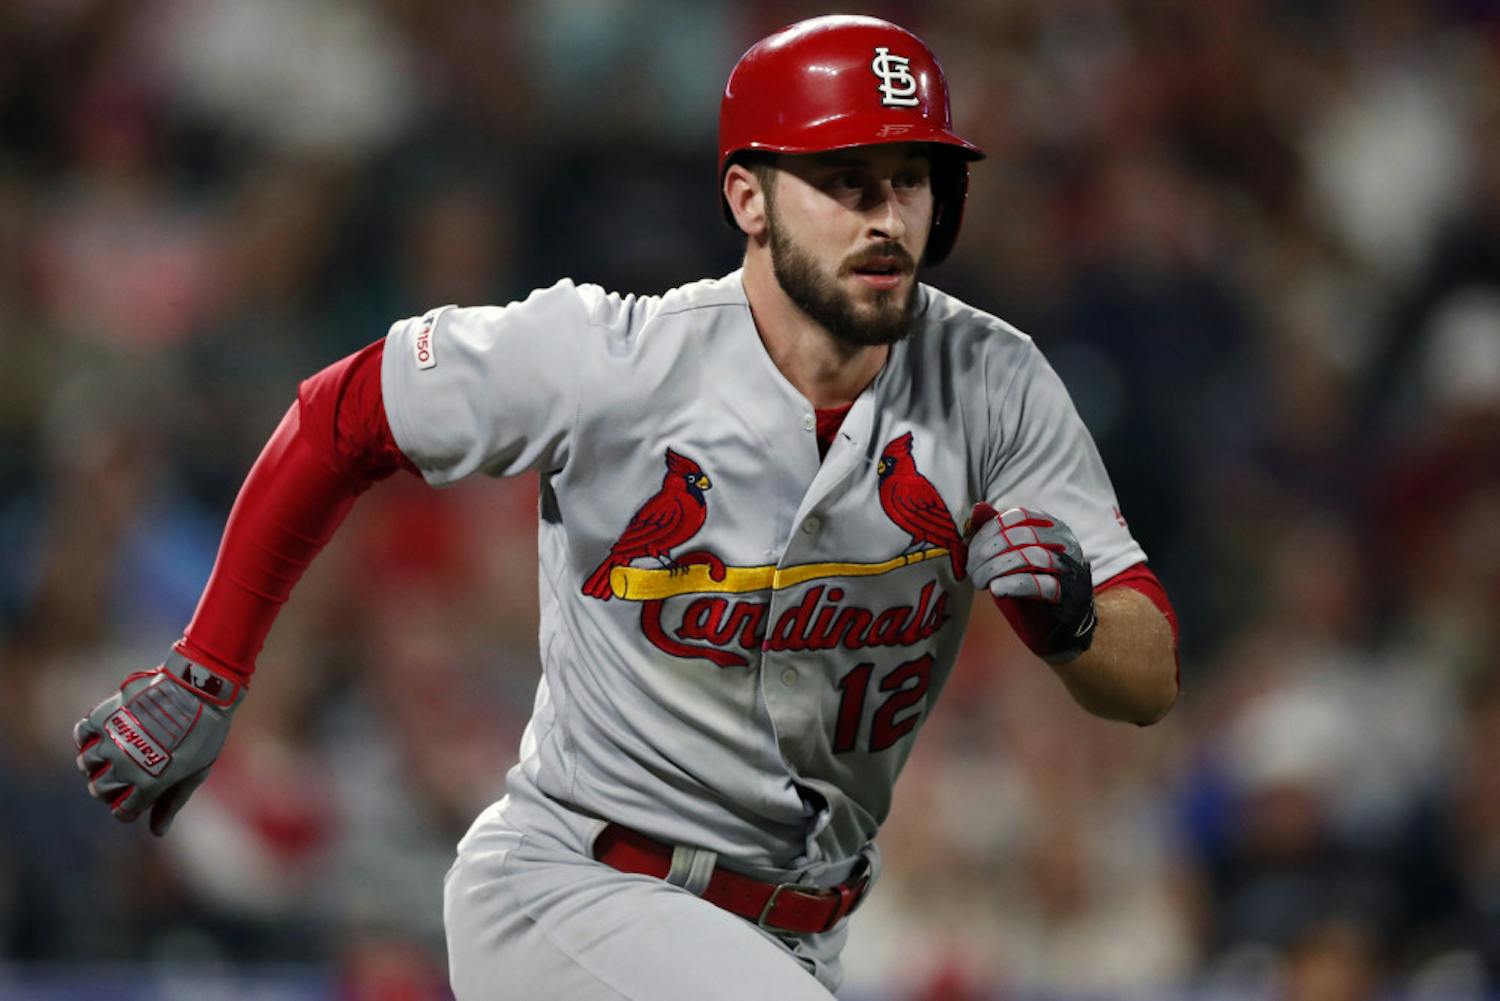 FILE - In this Sept. 10, 2019, file photo, St. Louis Cardinals shortstop Paul DeJong (12) runs the bases in the ninth inning of a baseball game against the St. Louis Cardinals in Denver. Reporters from The Associated Press spoke to more than two dozen athletes from around the globe -- representing seven countries and 11 sports -- to get a sense of how concerned or confident they are about resuming competition. Some wondered whether they would agree to receive a COVID-19 vaccine if required by their sport eventually. “I think it would stop at some sort of vaccine to play,” St. Louis Cardinals All-Star shortstop Paul DeJong said. “There is a fine line between what (MLB) can do to protect us and some things they can do to kind of exert power over us.”(AP Photo/David Zalubowski, File)